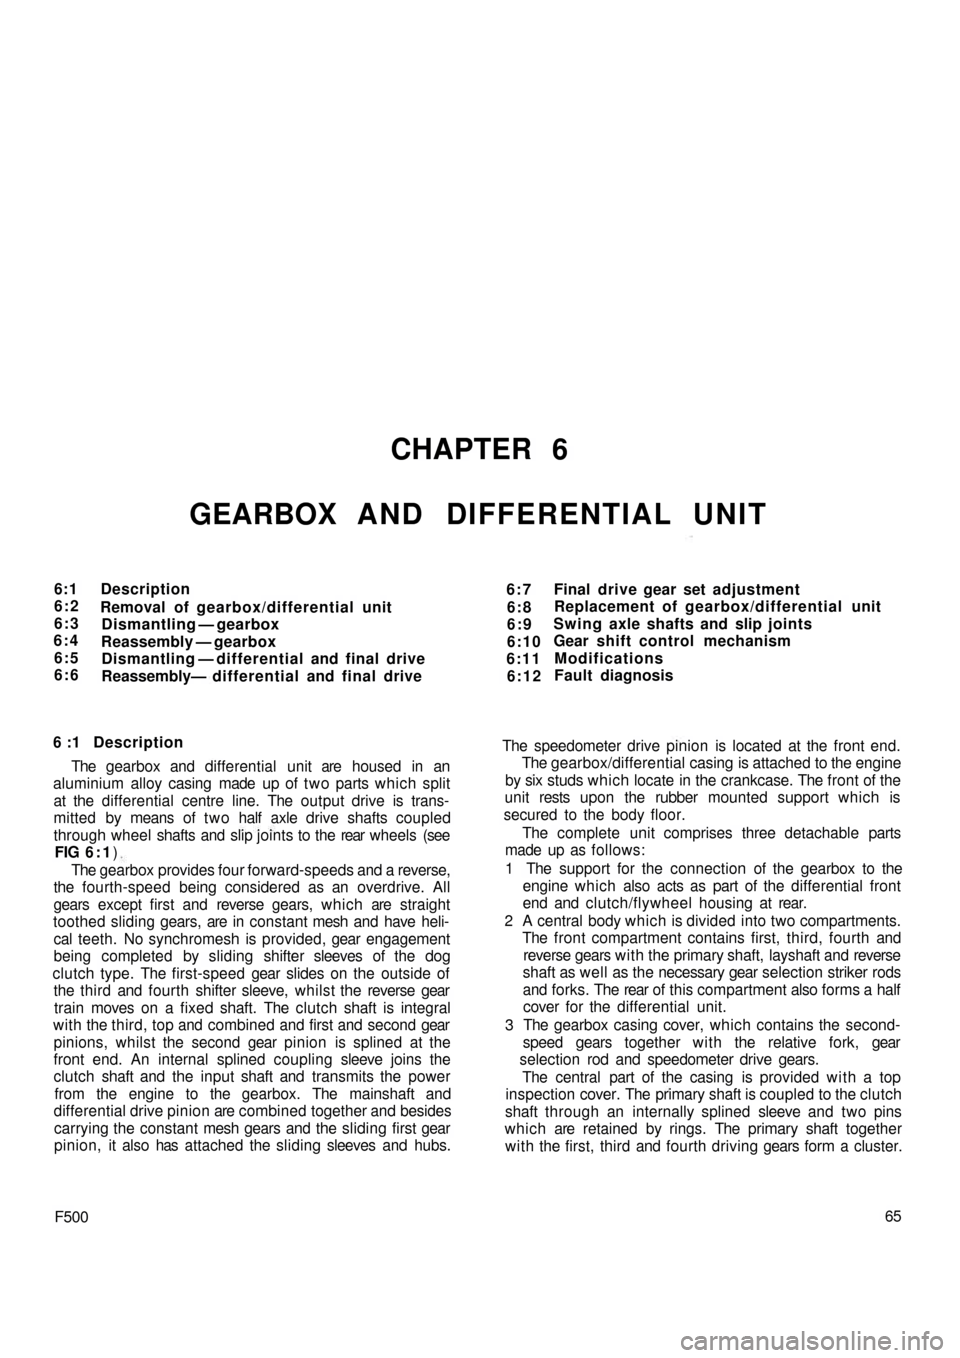 FIAT 500 1972 1.G Workshop Manual CHAPTER 6
GEARBOX AND DIFFERENTIAL UNIT
6:1
6:2
6:3
6:4
6:5
6:6Description
Removal of gearbox/differential unit
Dismantling — gearbox
Reassembly — gearbox
Dismantling — differential and final dr